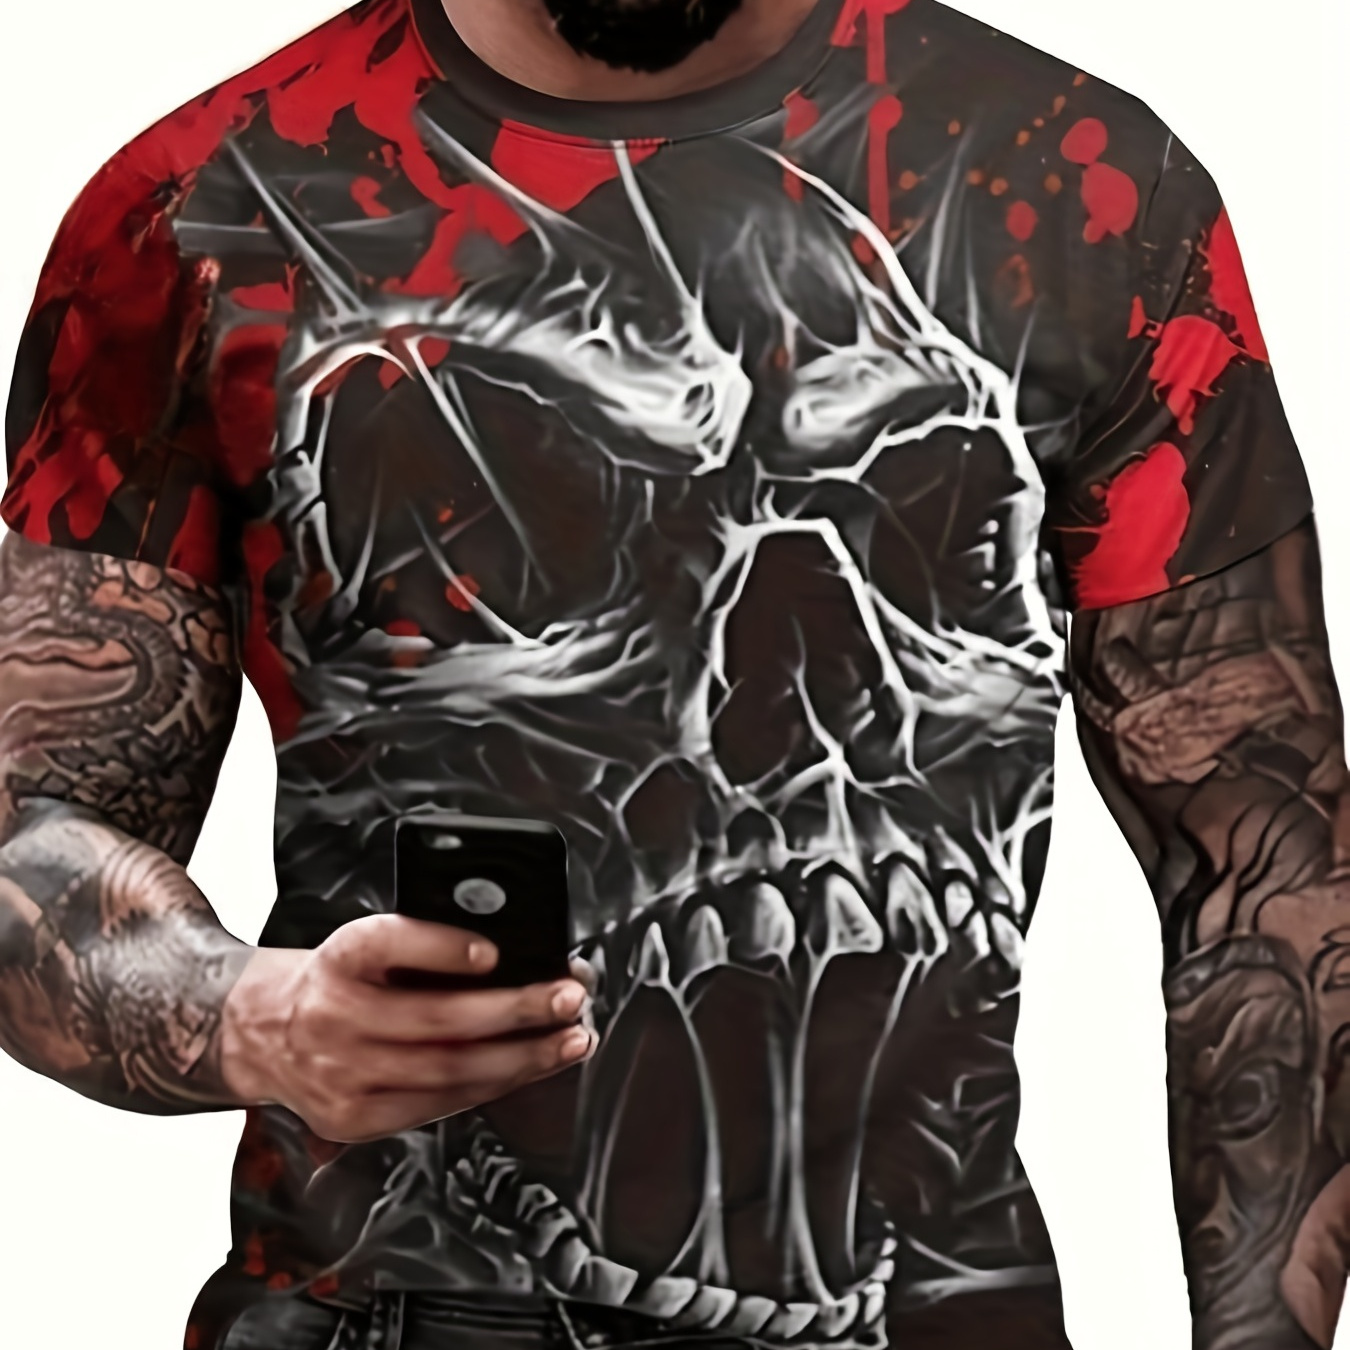 

Vintage Skull Graphic Print T-shirt: Look Stylish & Cool This Summer!